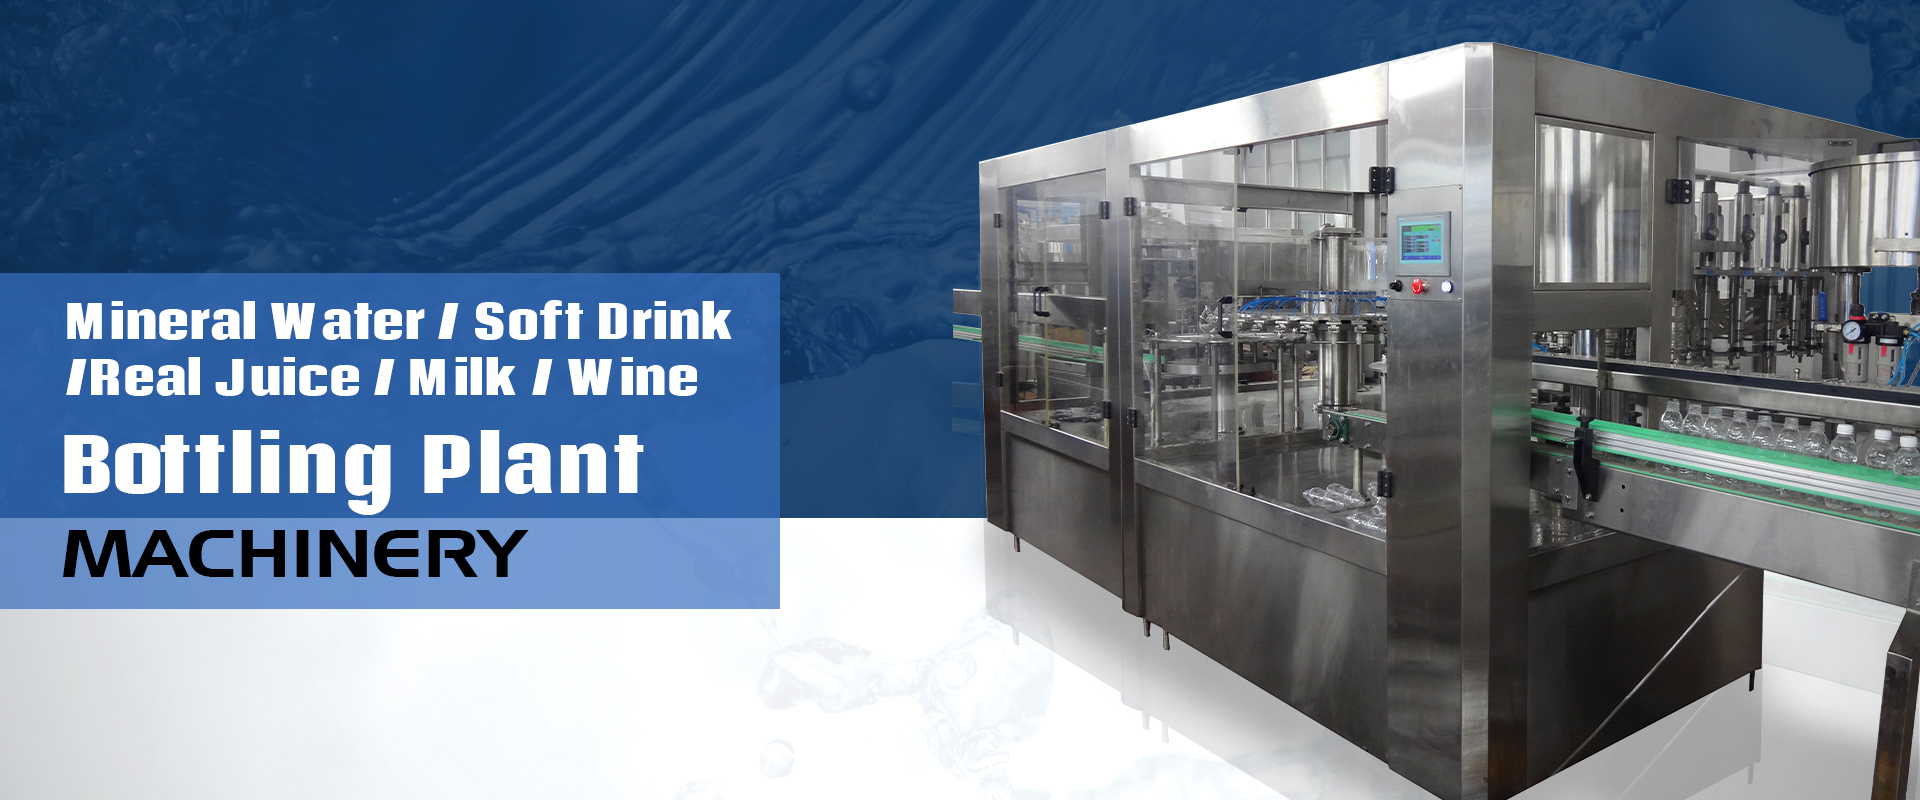 Mineral Water / Soft Drink / Real Juice / Milk / Wine Bottling Plant And Machinery